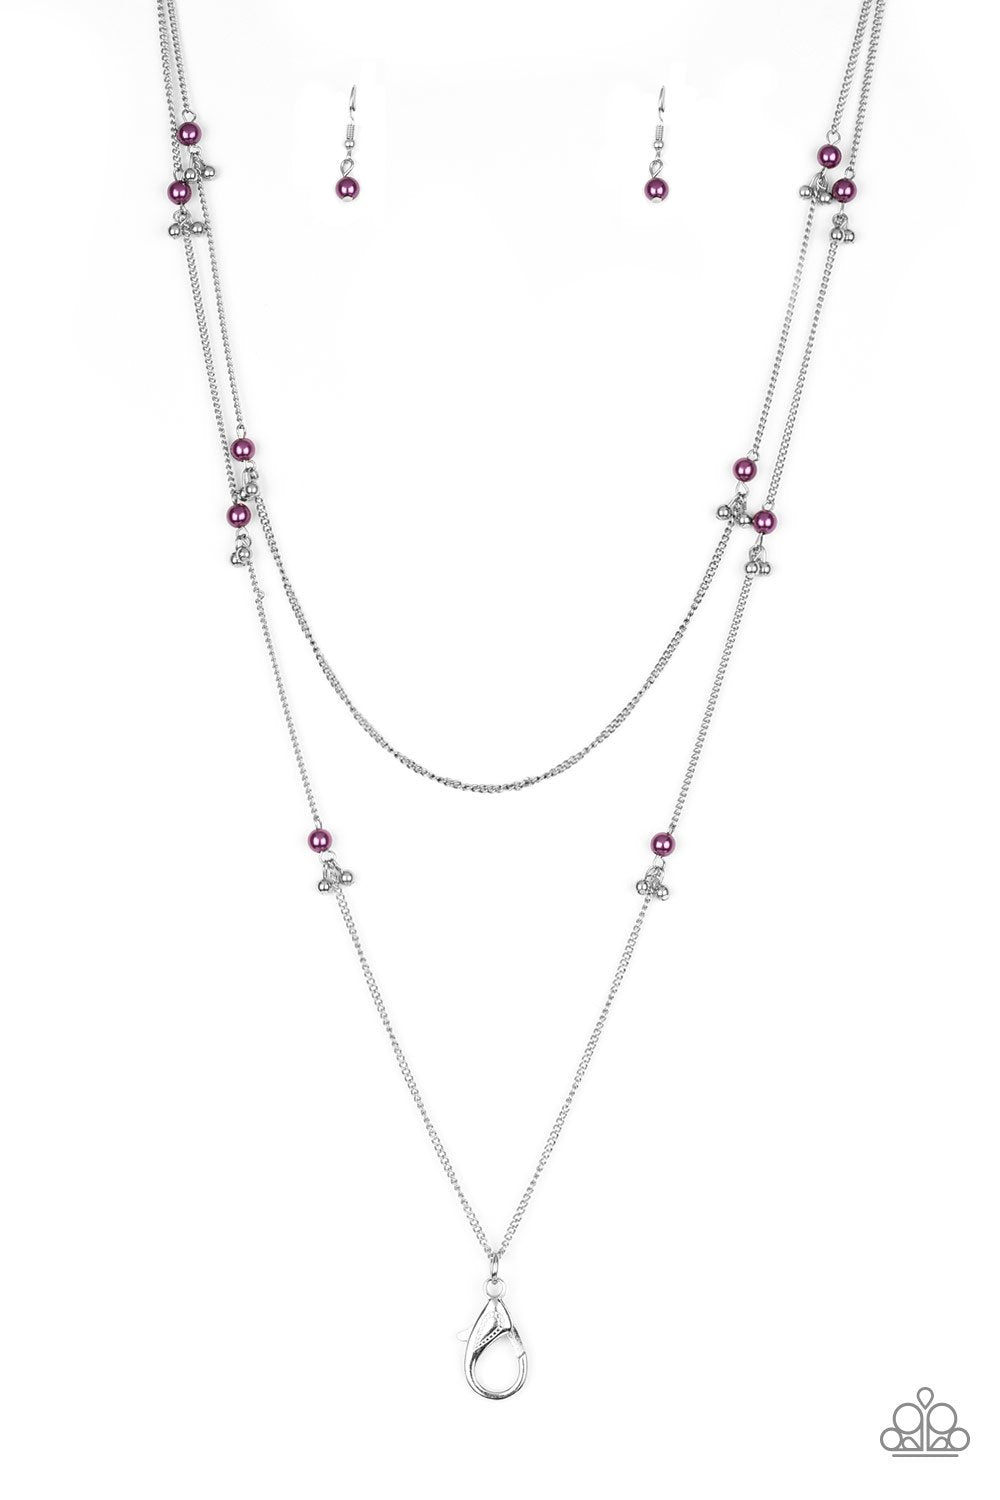 Ultrawealthy Purple and Silver Lanyard Necklace - Paparazzi Accessories - lightbox -CarasShop.com - $5 Jewelry by Cara Jewels